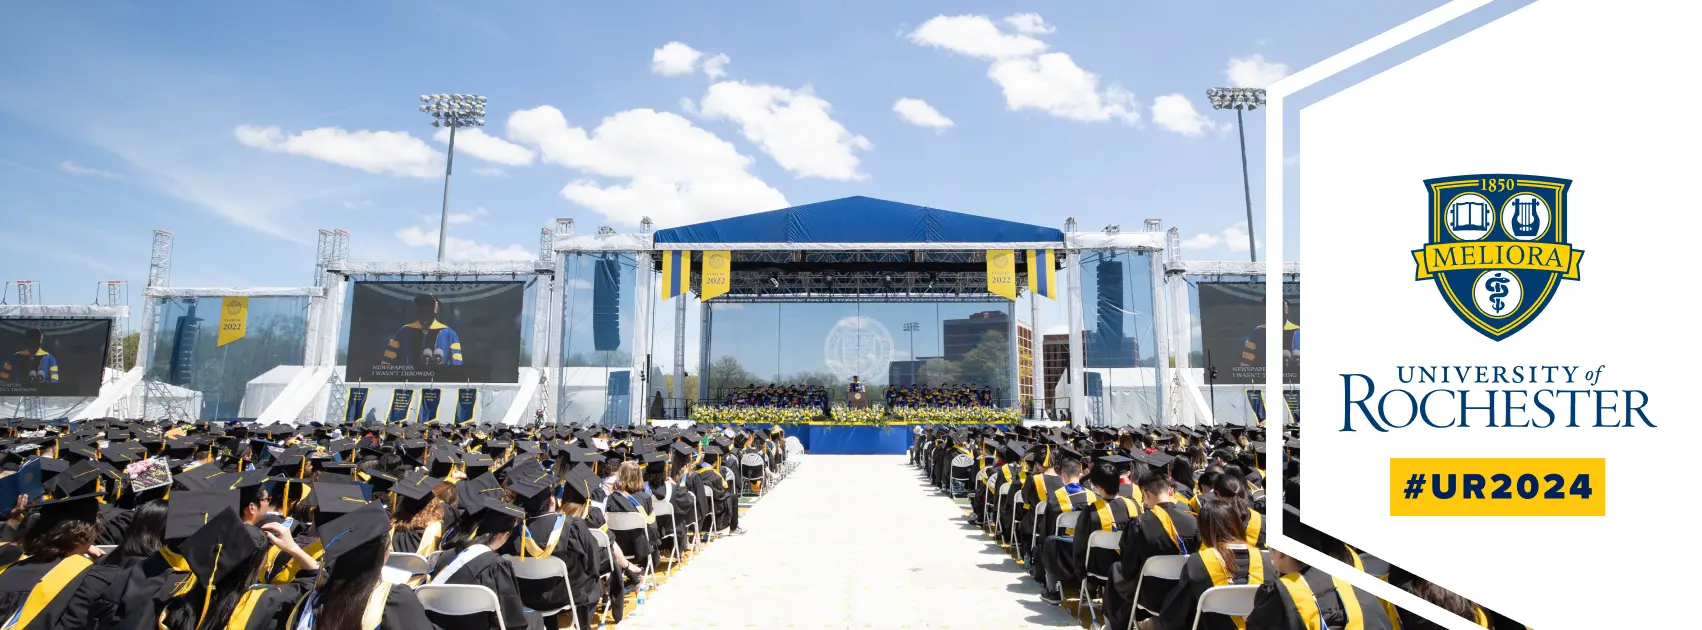 Commencement stage viewed from crowd